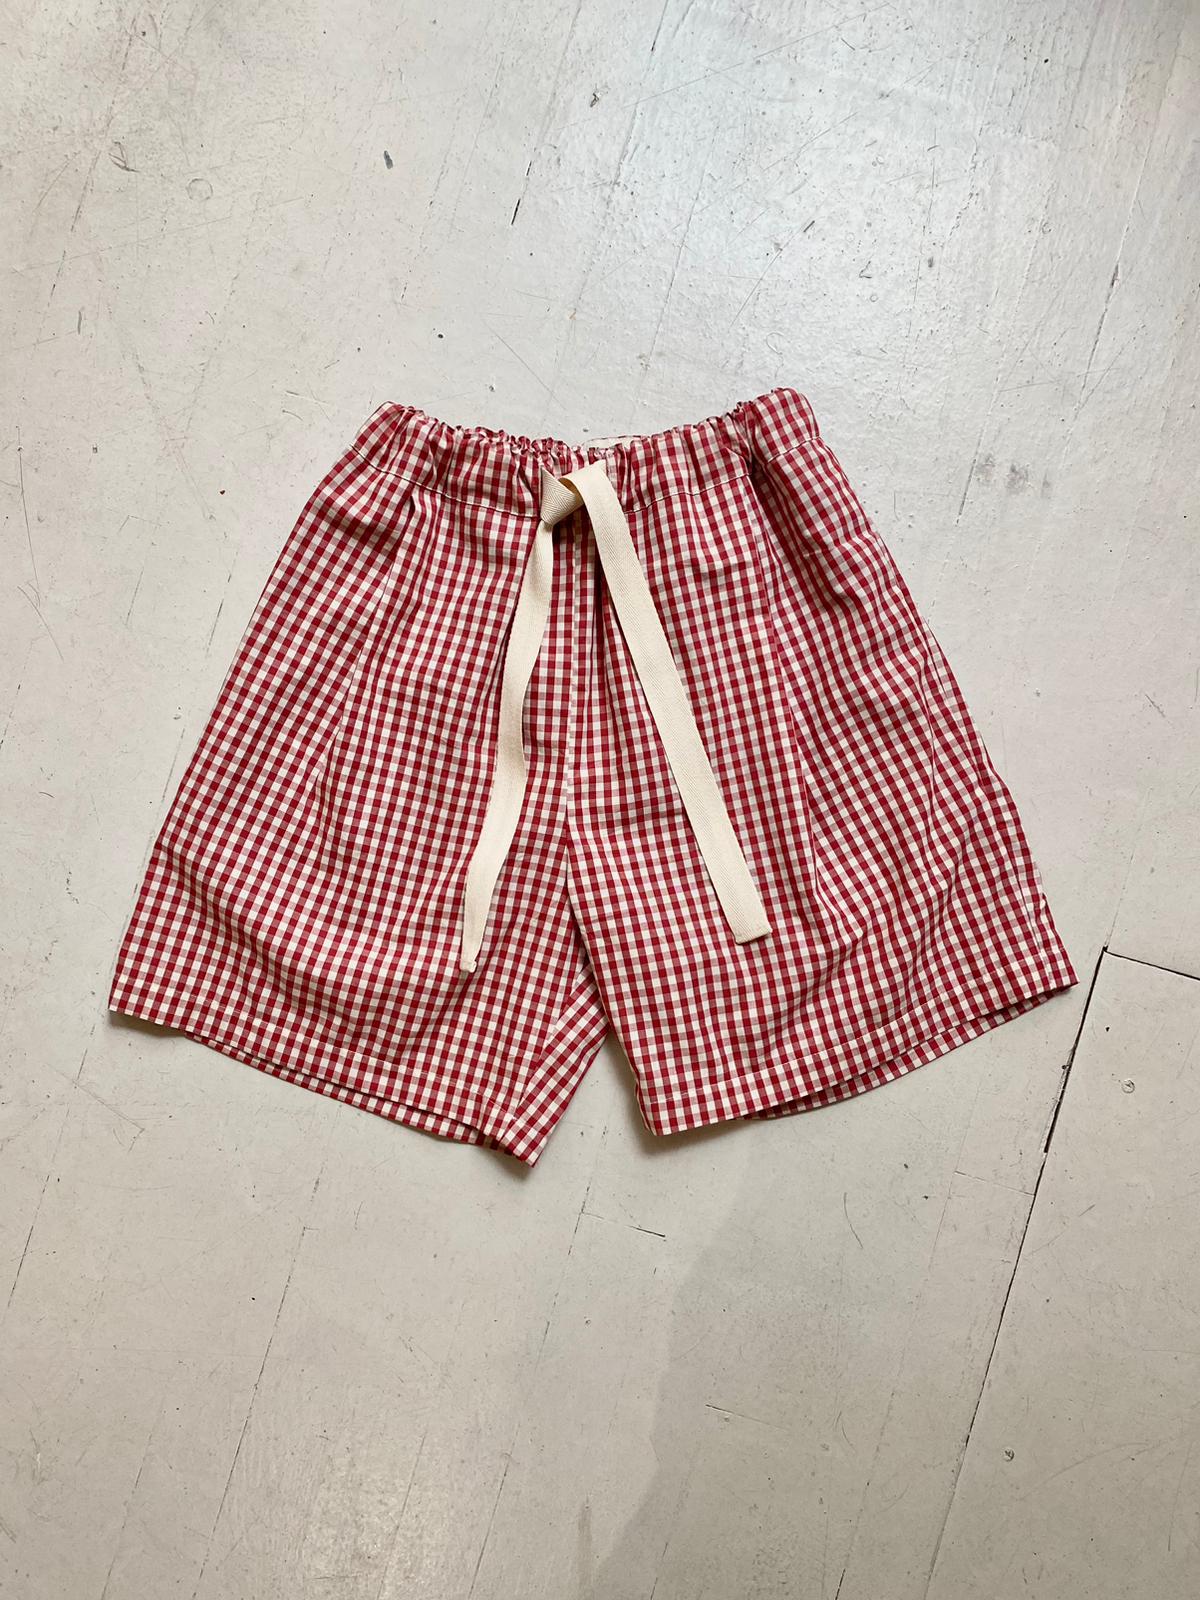 Swan Shorts in Red Gingham